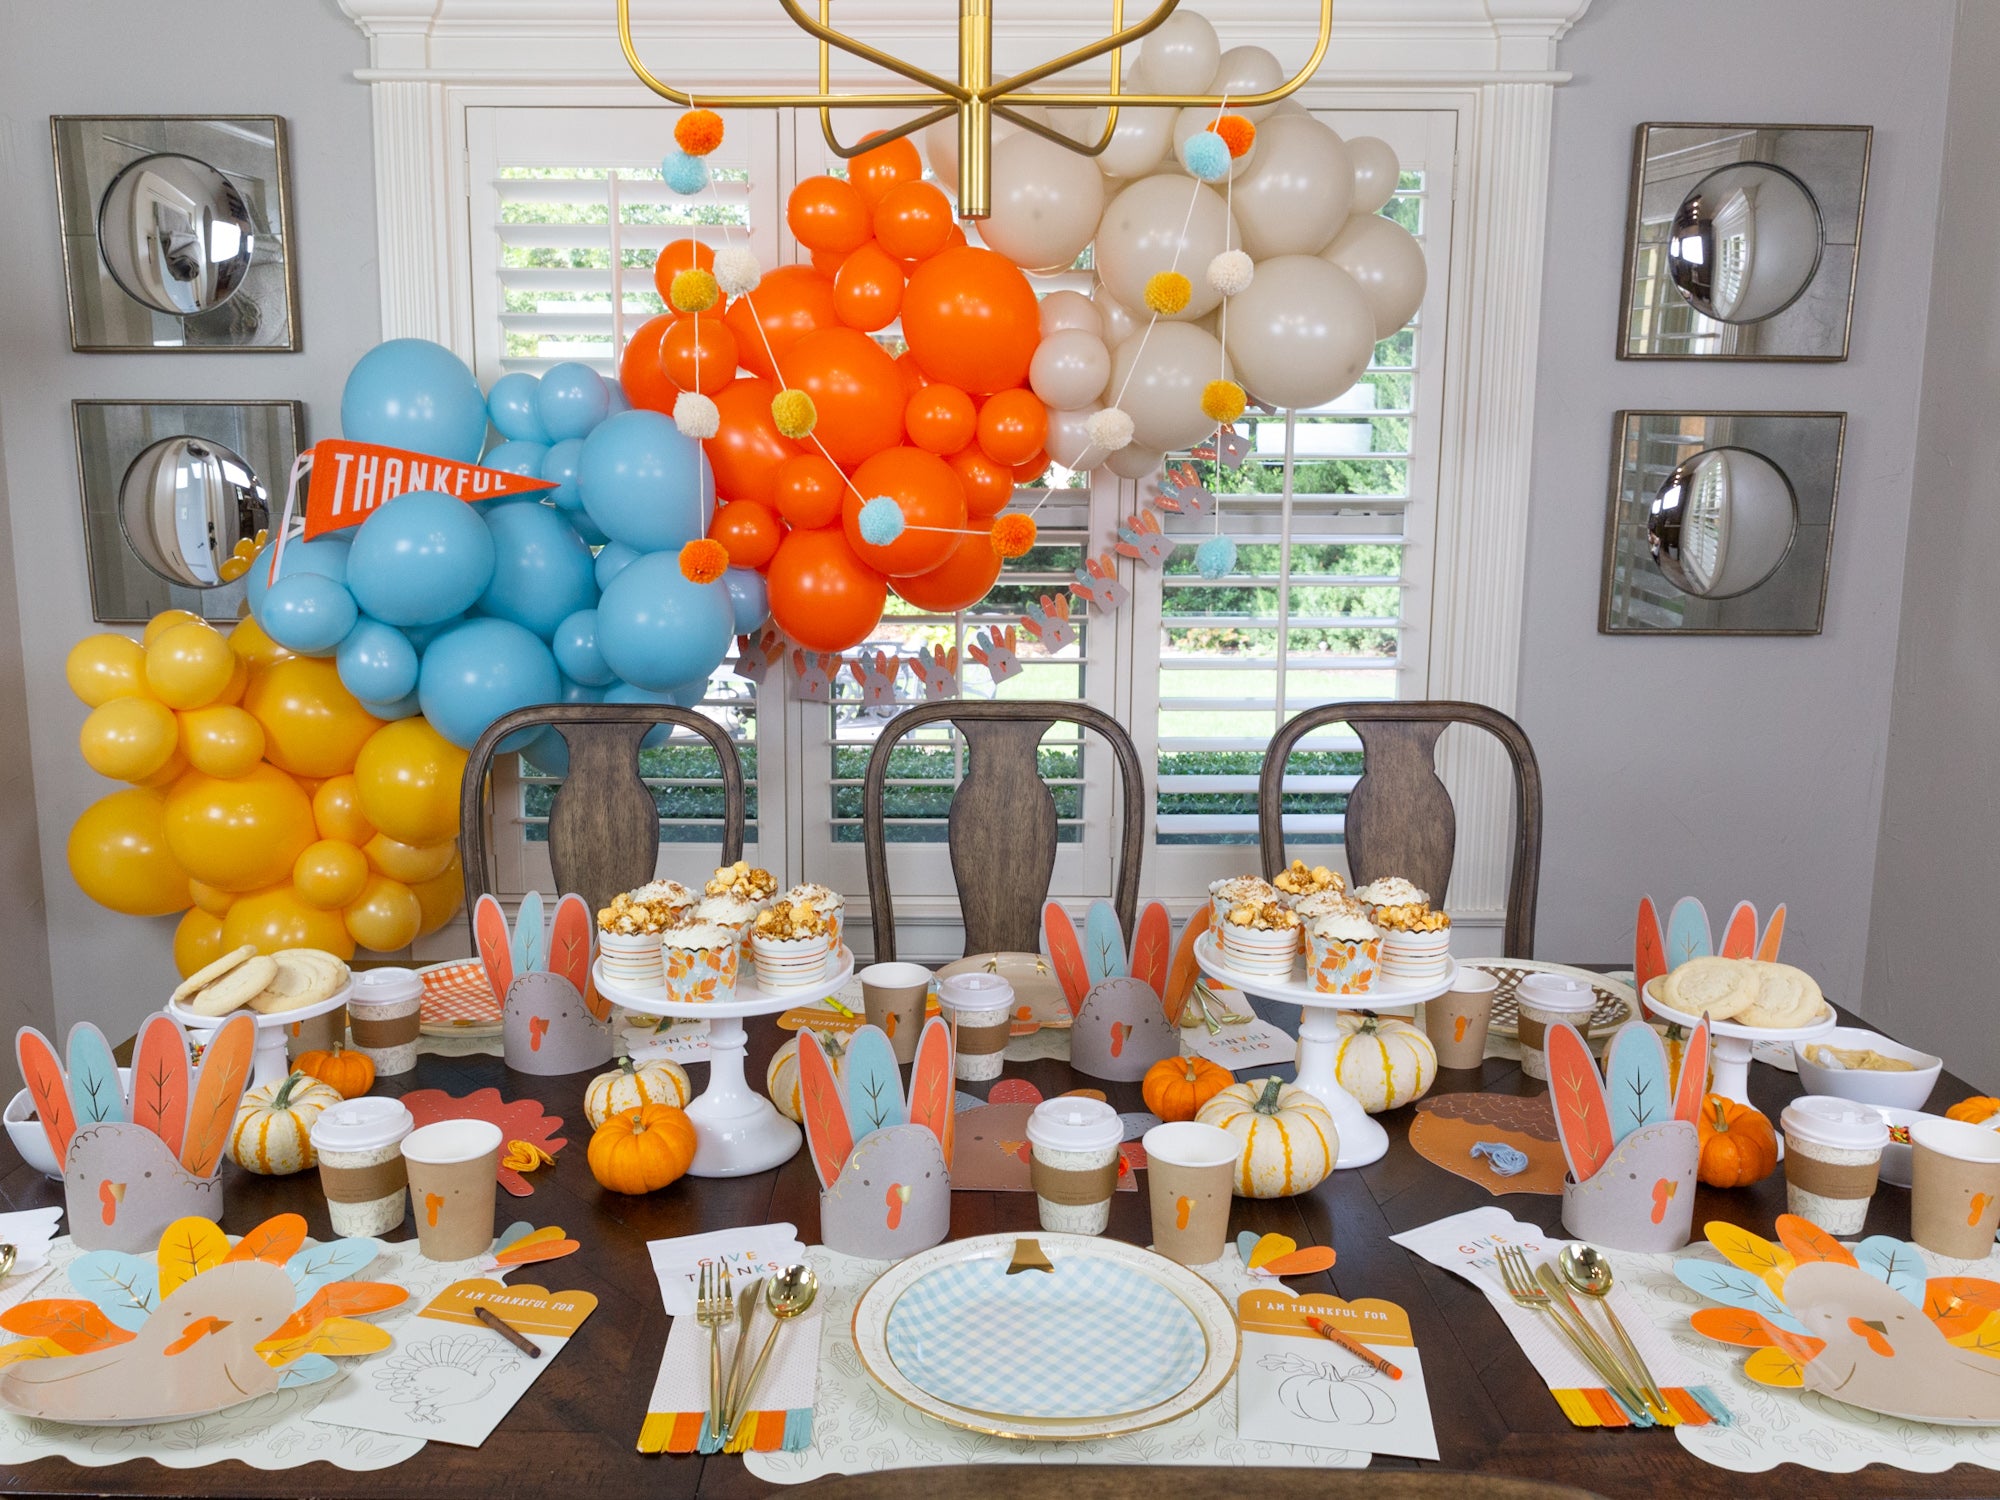 6 Simple Steps for Planning a Fun Thanksgiving Table for Kids | The Party Darling